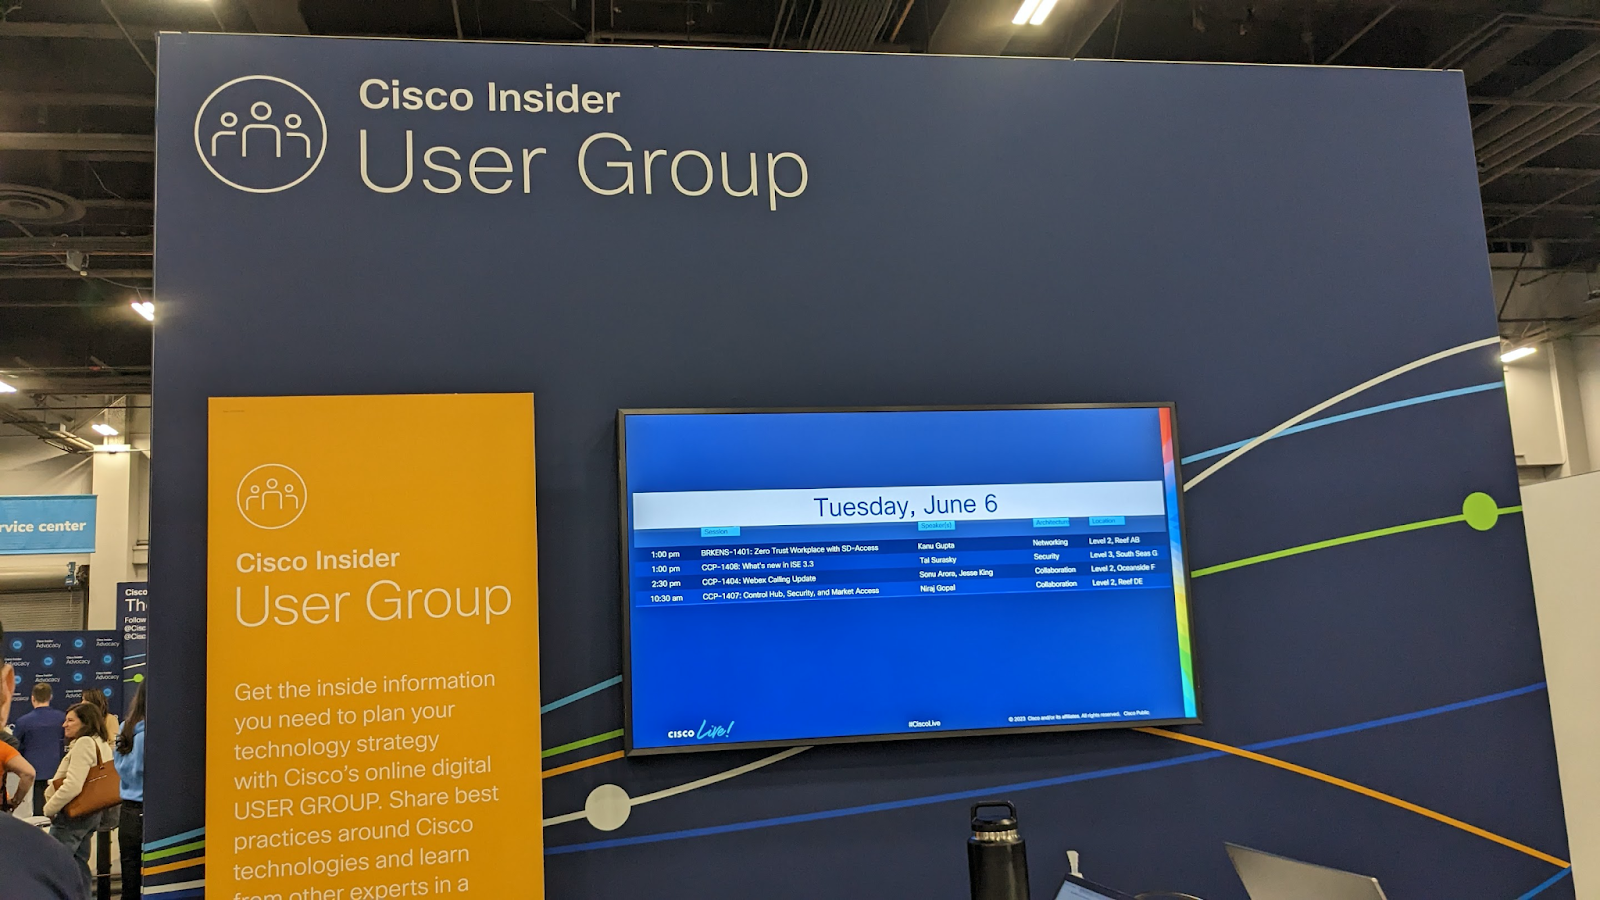 Introducing Cisco Insider - A User Group for Cisco users, customers and partners